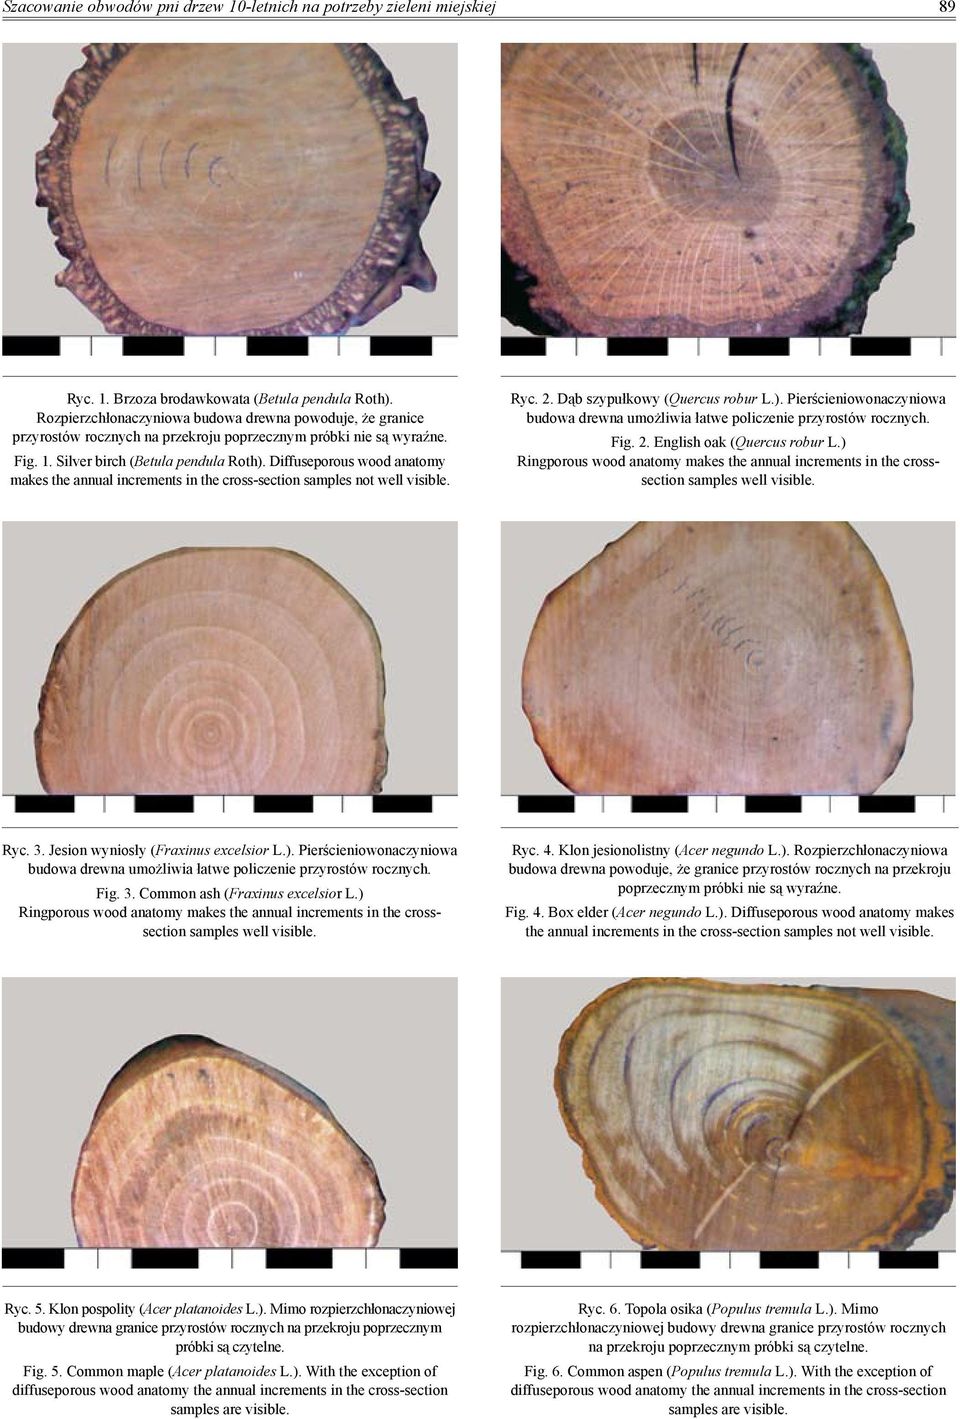 Diffuseporous wood anatomy makes the annual increments in the cross-section samples not well visible. Ryc. 2. Dąb szypułkowy (Quercus robur L.).